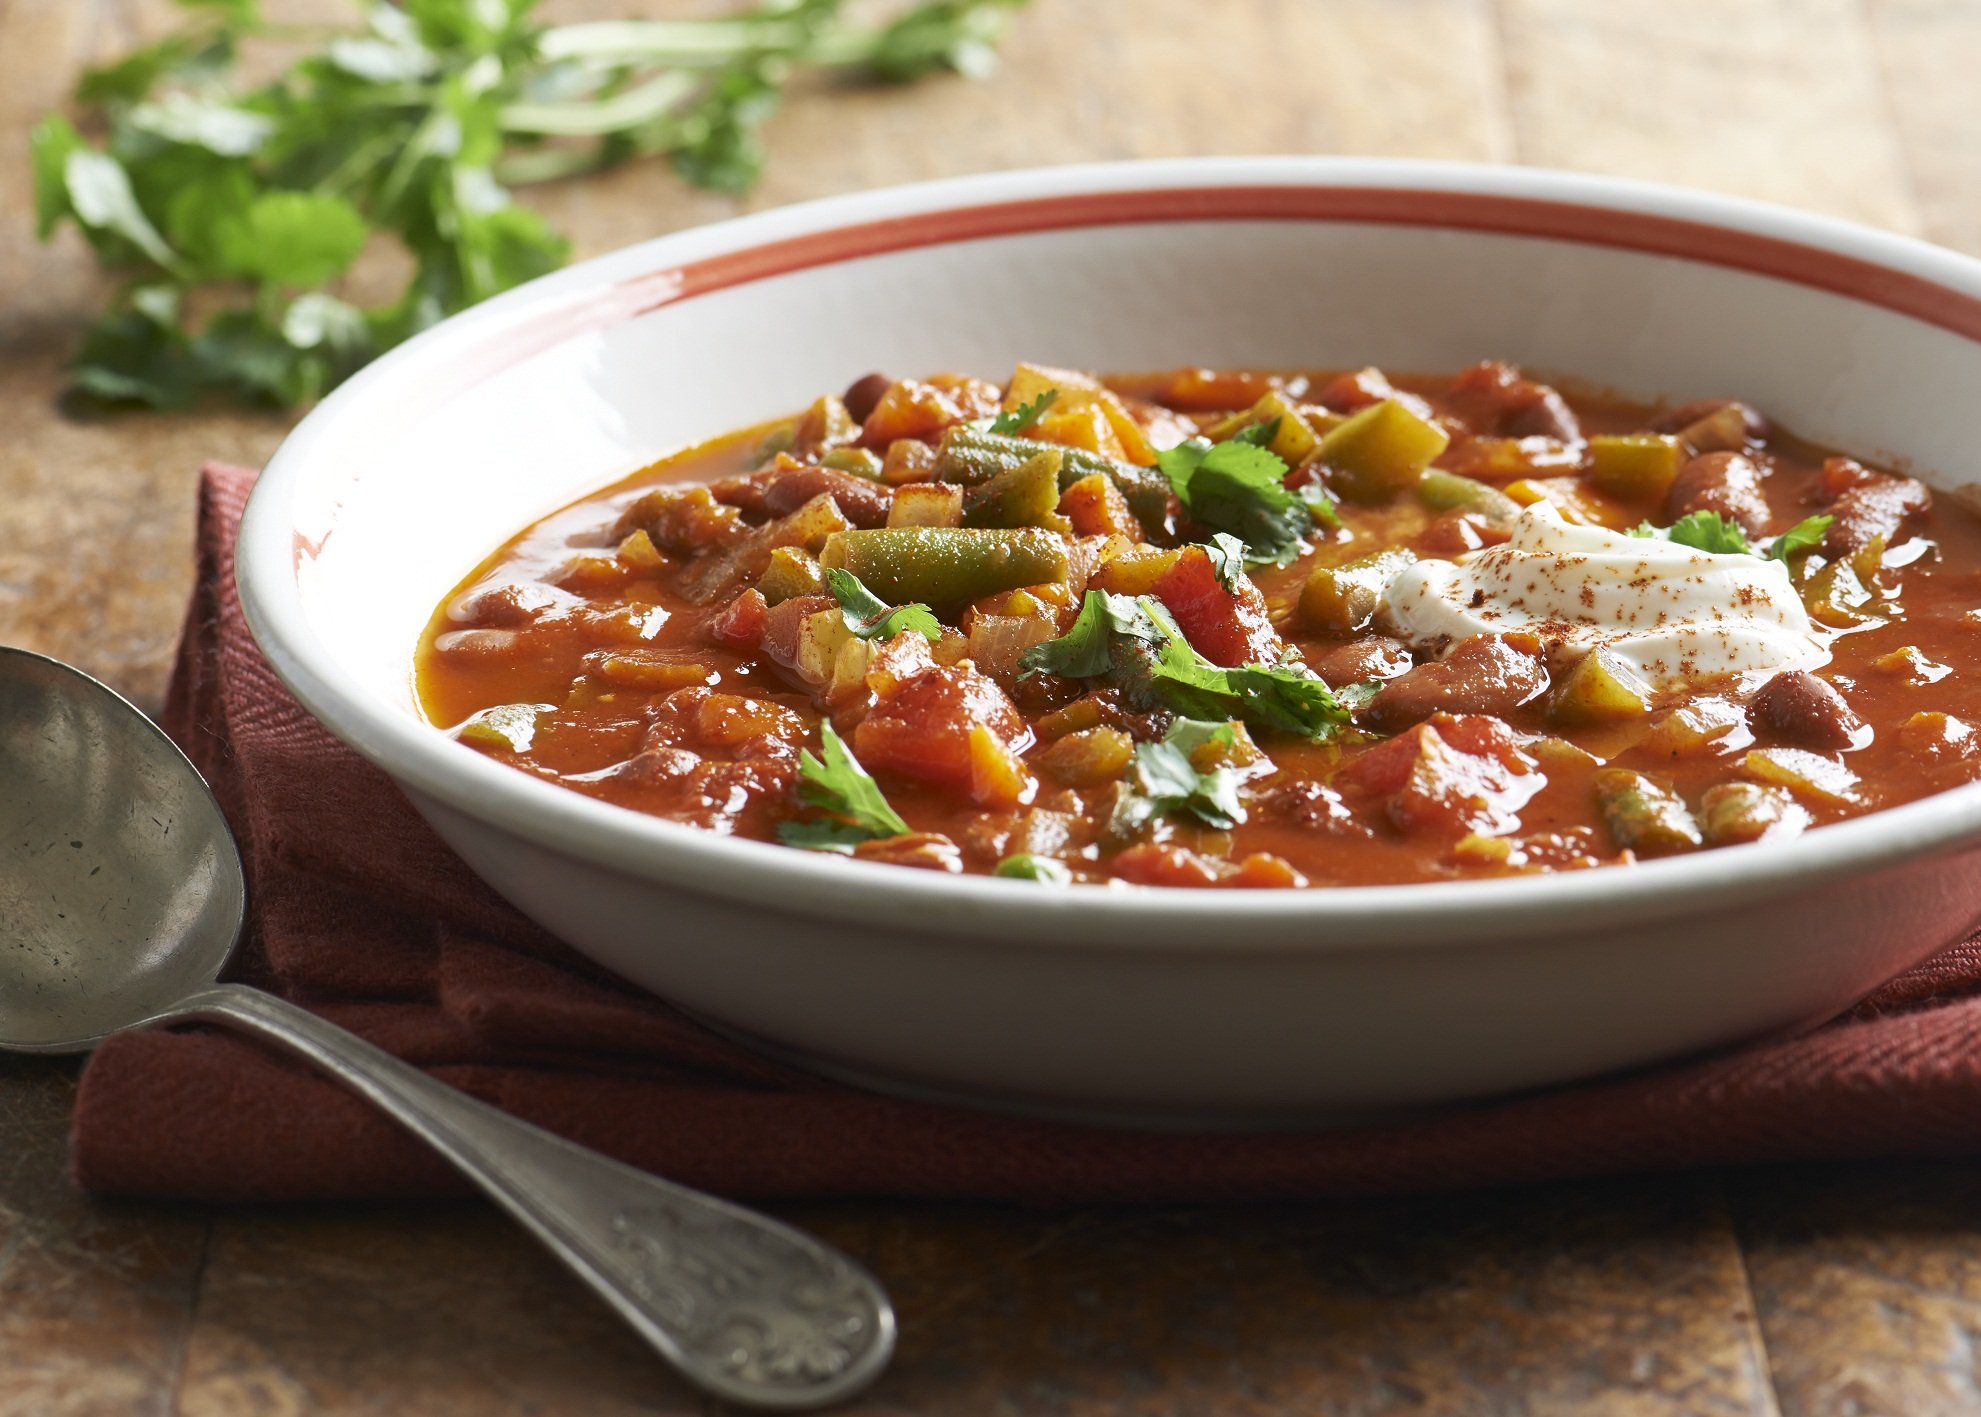 Boom! Add some exotic beans to your chili recipes. Photo via Meredith Publishing